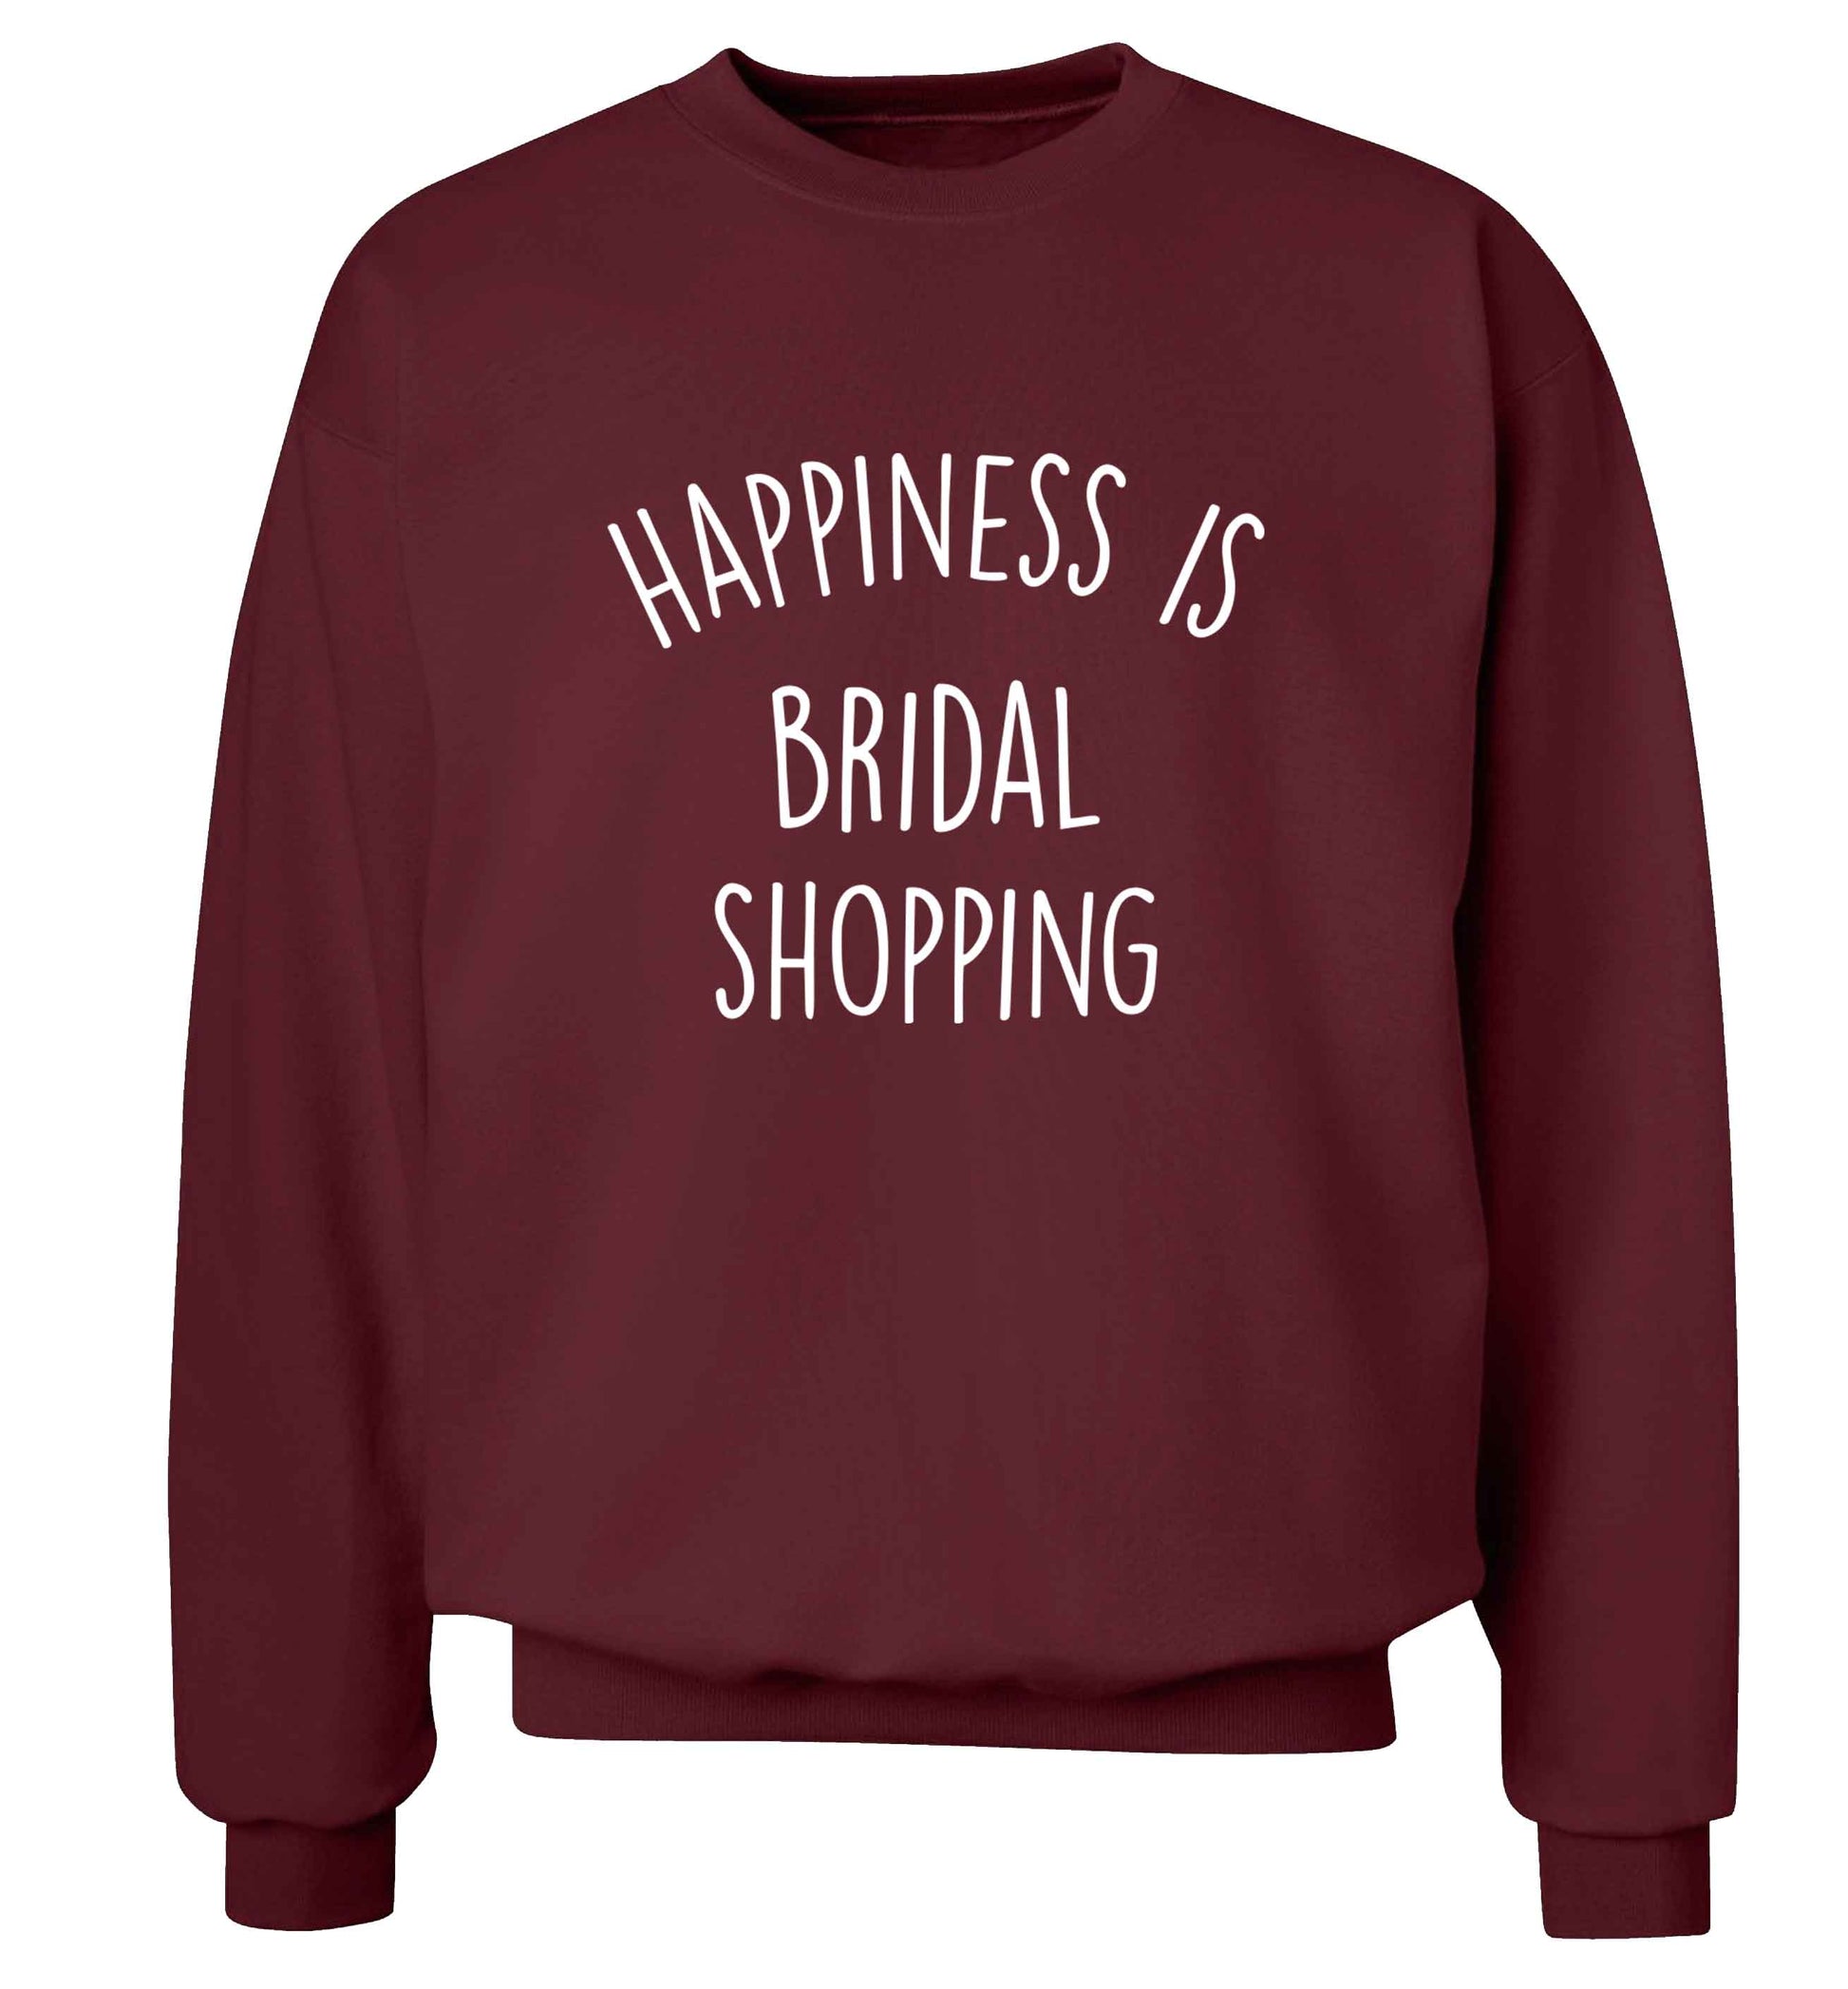 Happiness is bridal shopping adult's unisex maroon sweater 2XL